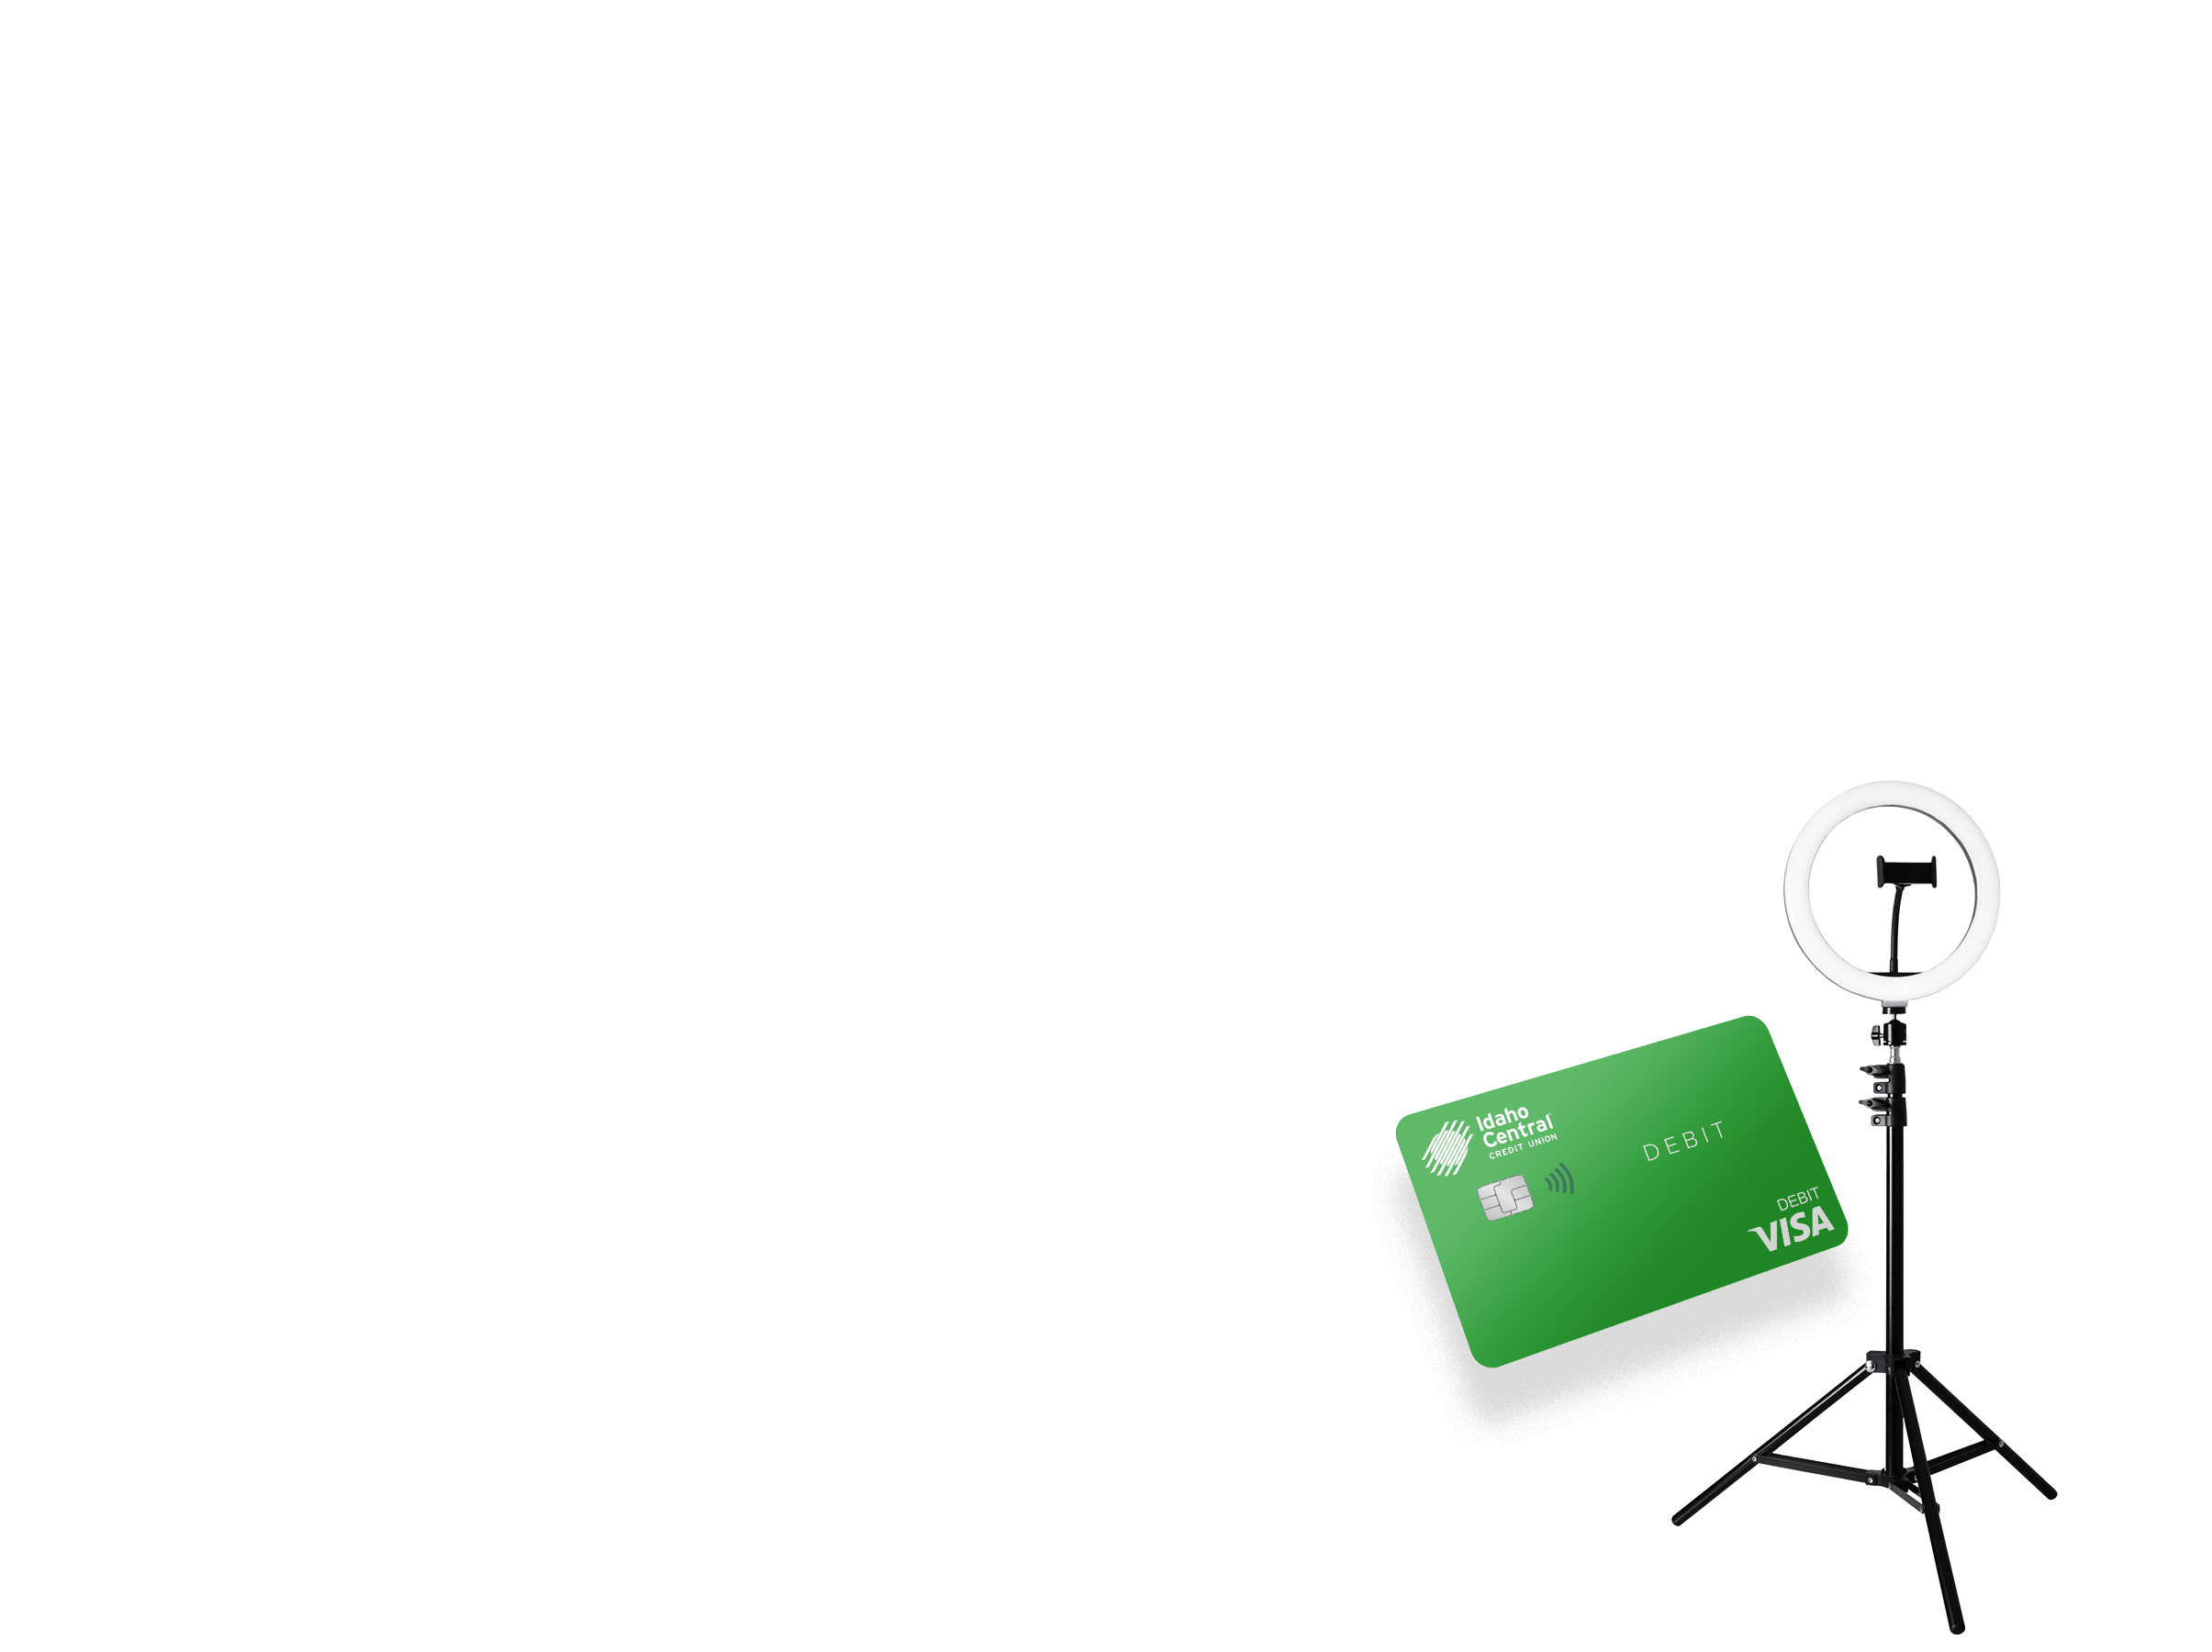 Green ICCU debit card floating in the foreground and a ring light on a stand